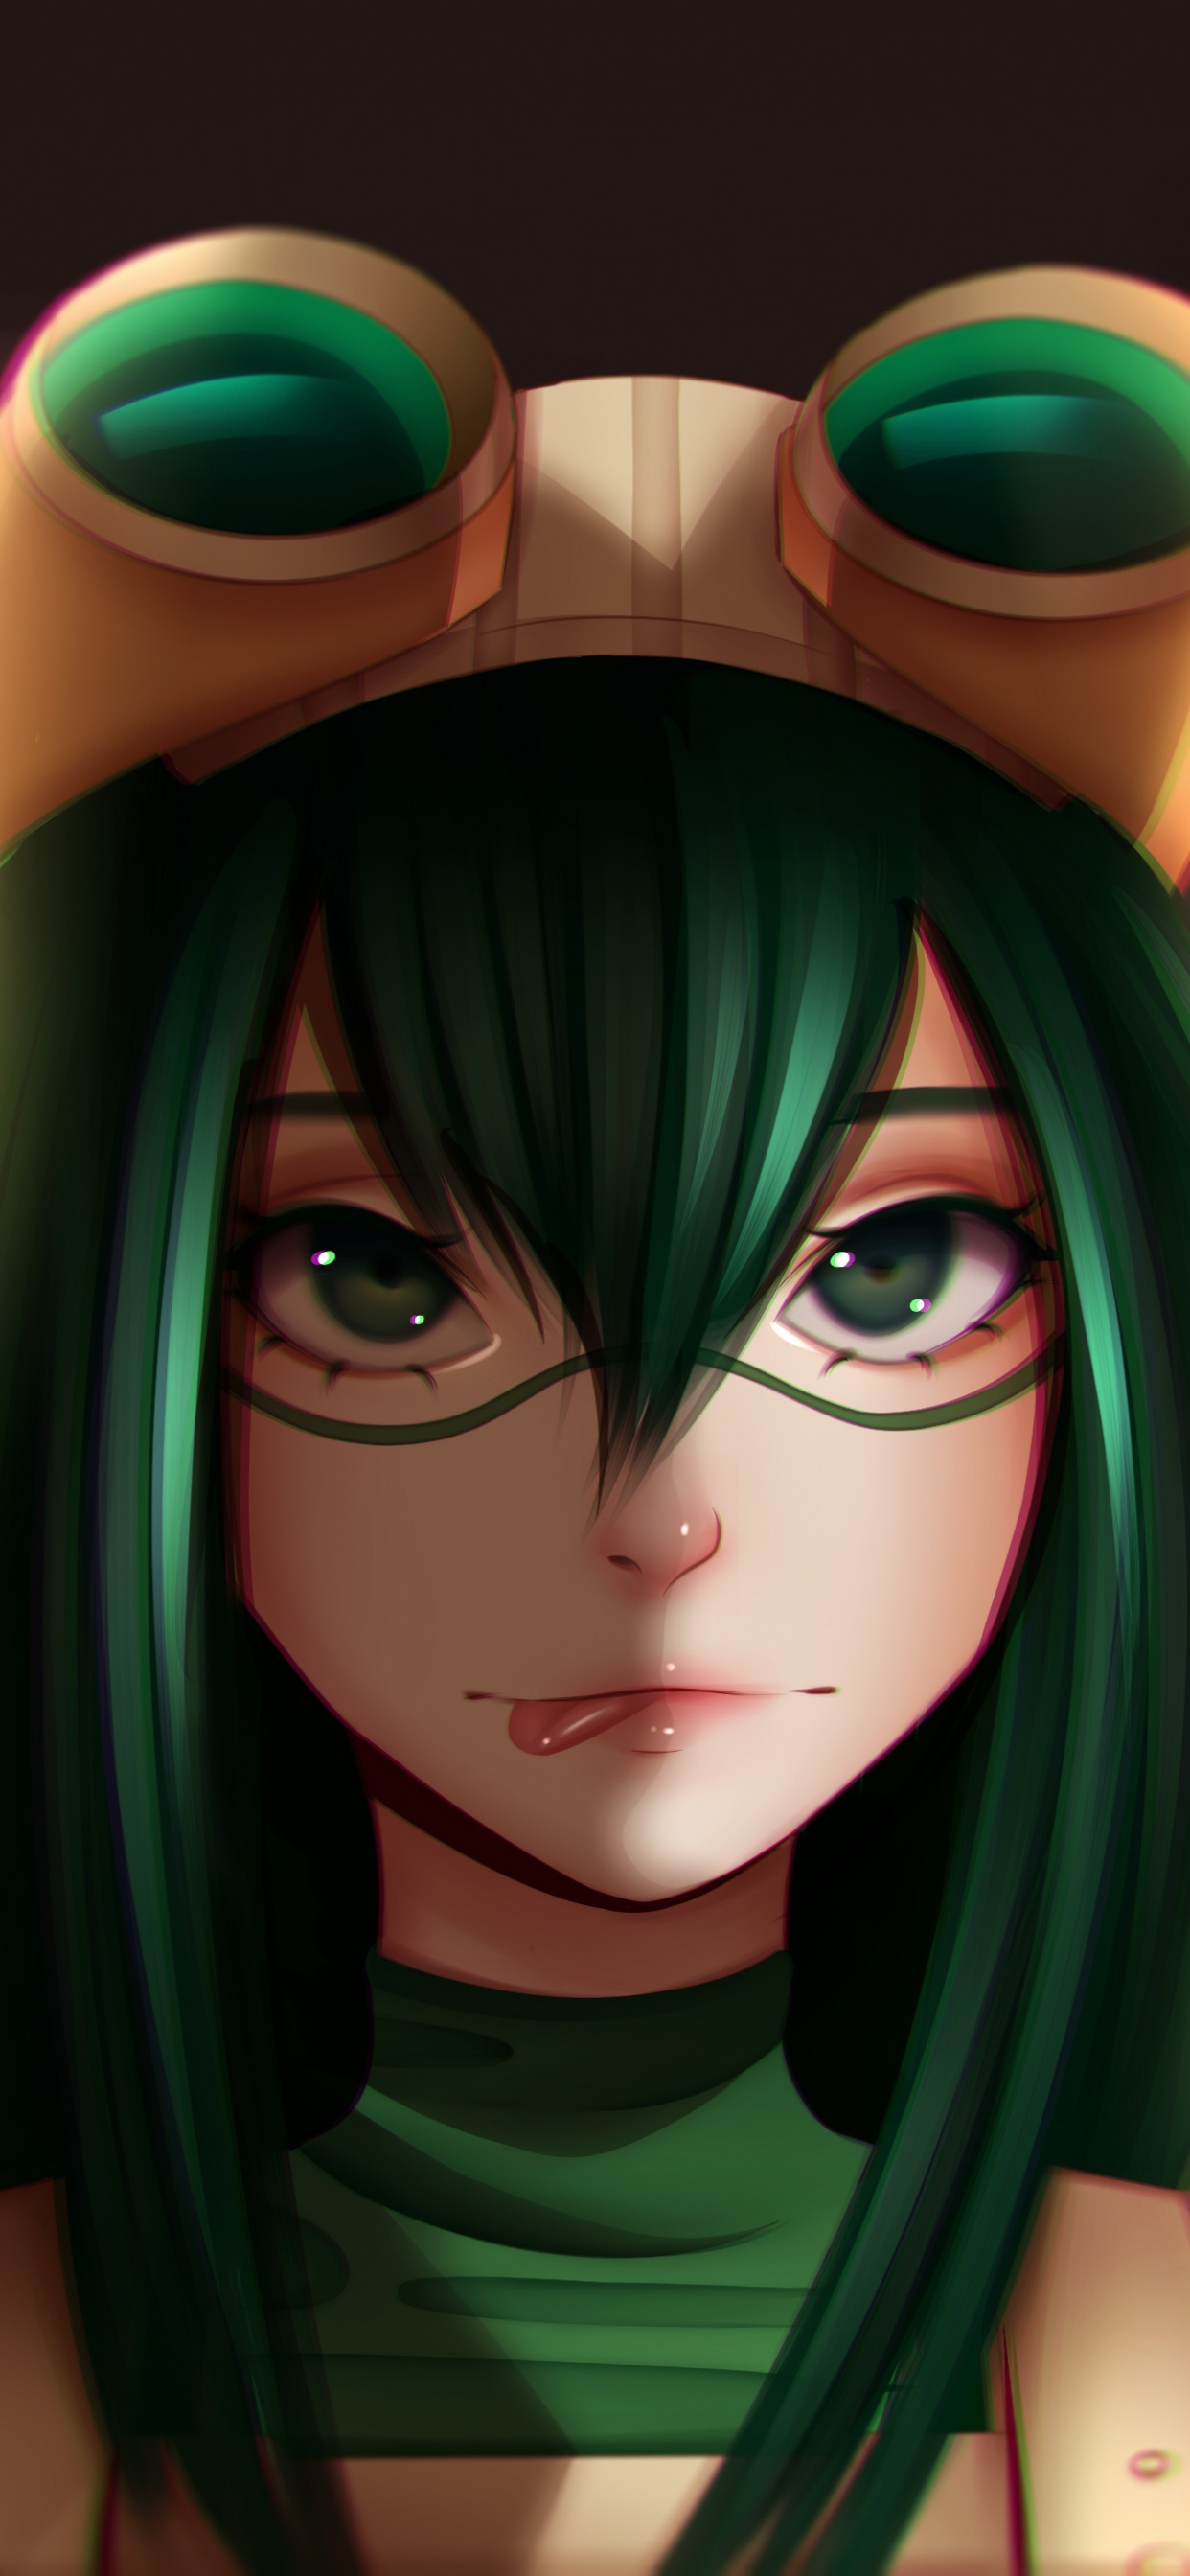 Personnage D'anime Féminin Aux Cheveux Verts. Wallpaper in 1242x2688 Resolution